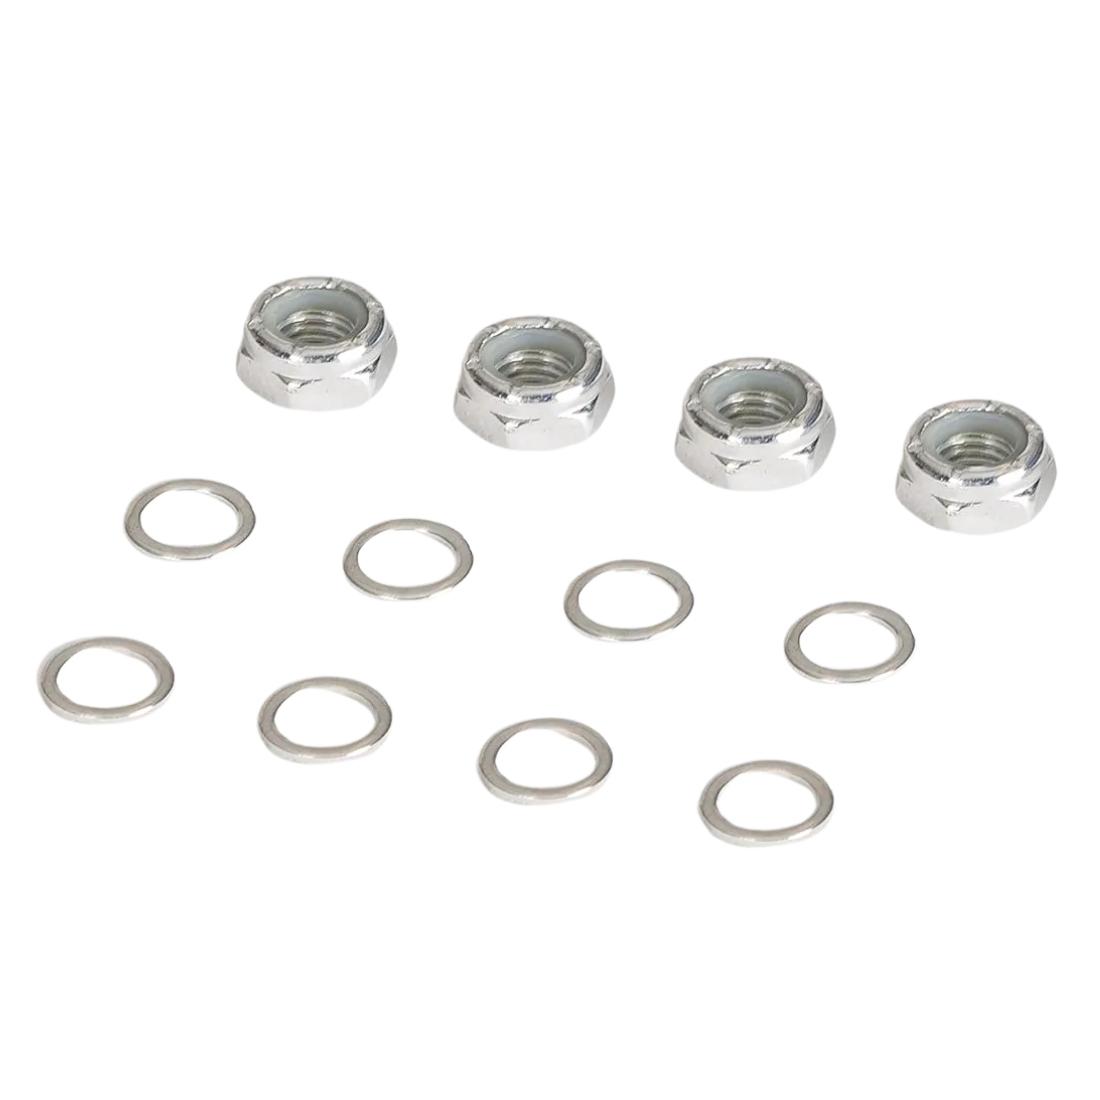 Sushi Axle Kit With Nuts And Washers - Silver